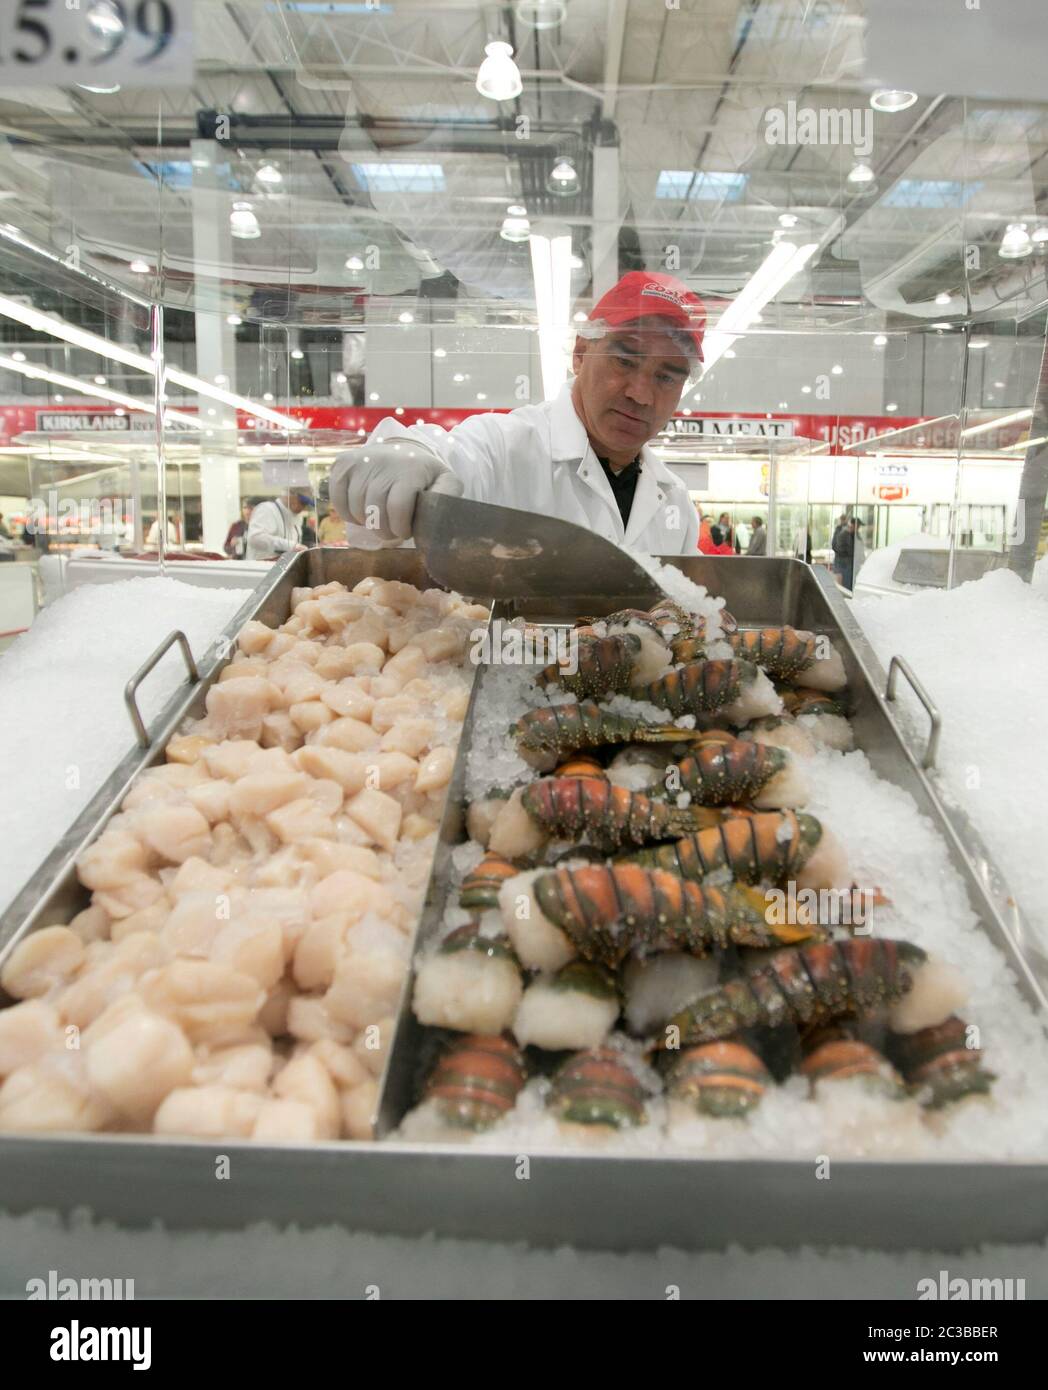 Cedar Park Texas USA, November 22 2013: Employee pours crushed ice over lobster tails in fresh seafood department of newly opened Costco warehouse club in a fast-growing Austin suburb.   ©Marjorie Kamys Cotera/Daemmrich Photography Stock Photo